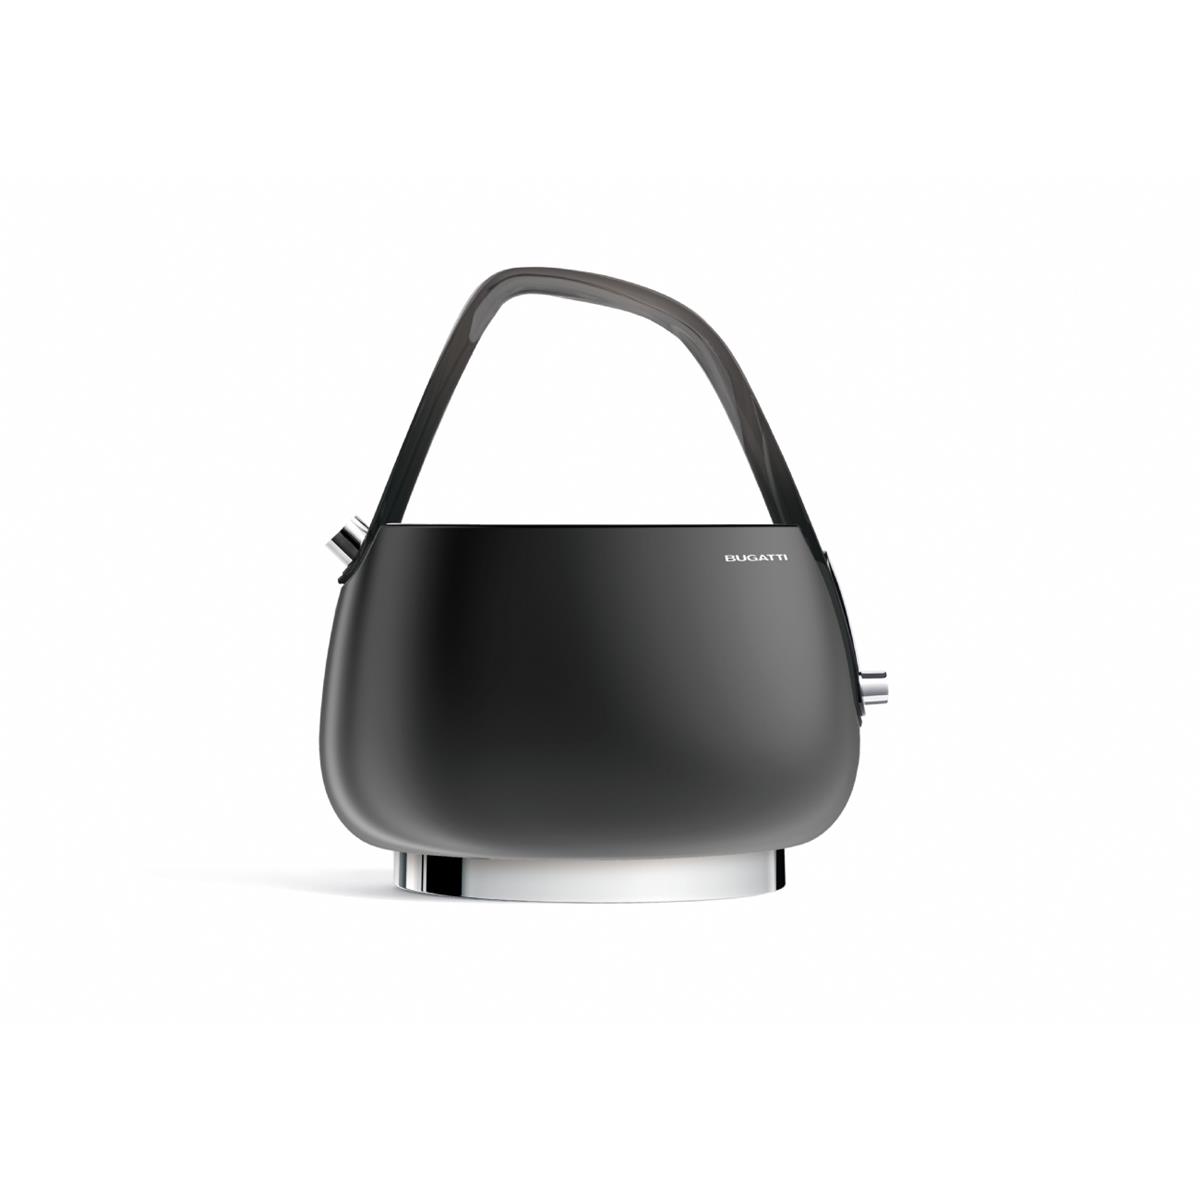 jackie - matt black electronic kettle with transparent smoked handle